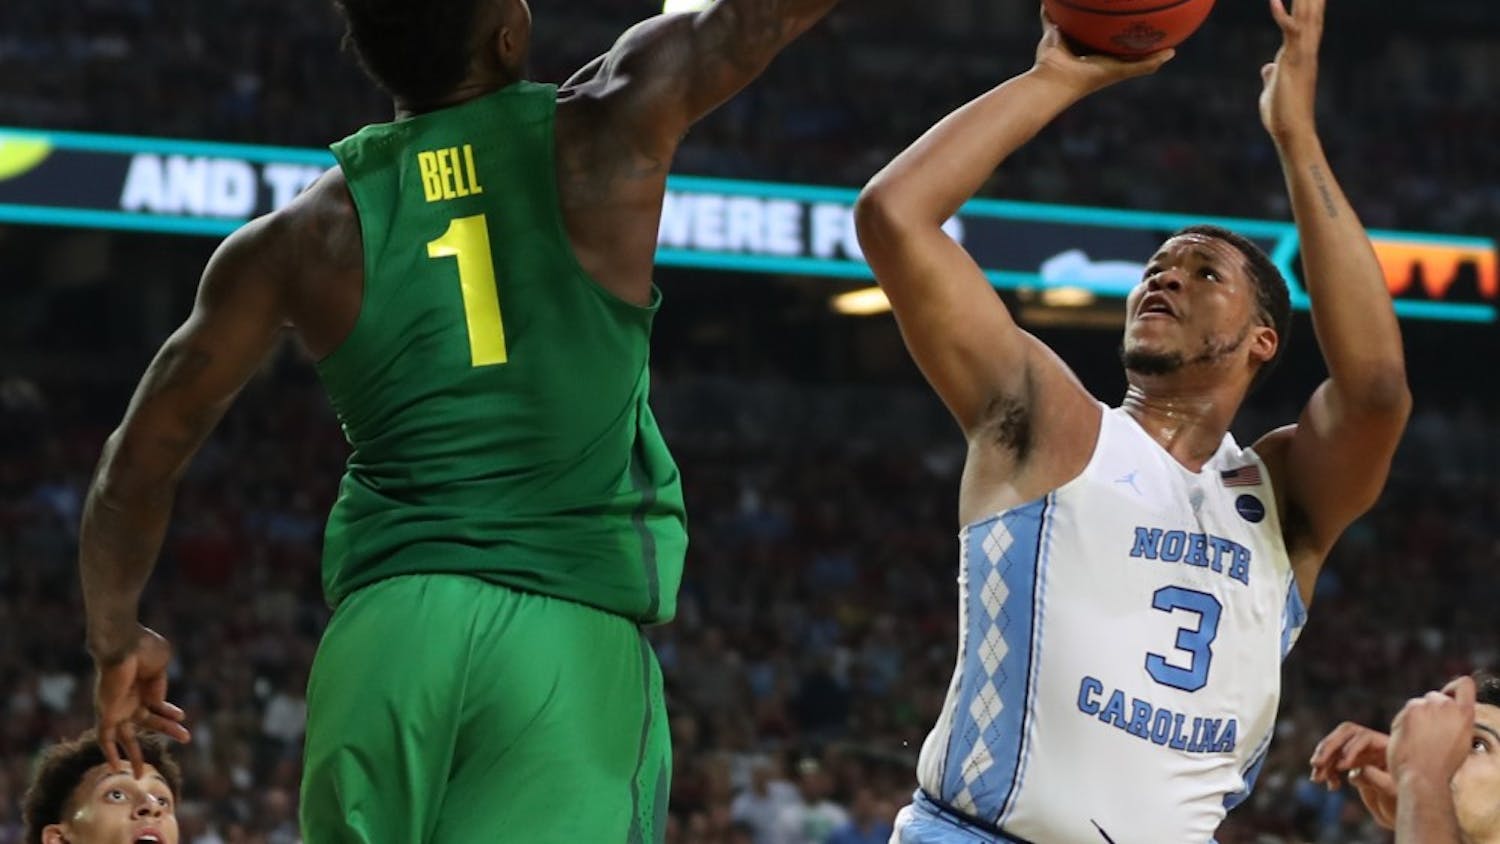 North Carolina forward Kennedy Meeks (3) shoots over Oregon forward Jordan Bell (1) in the teams' Final Four matchup on April 1 in Phoenix.